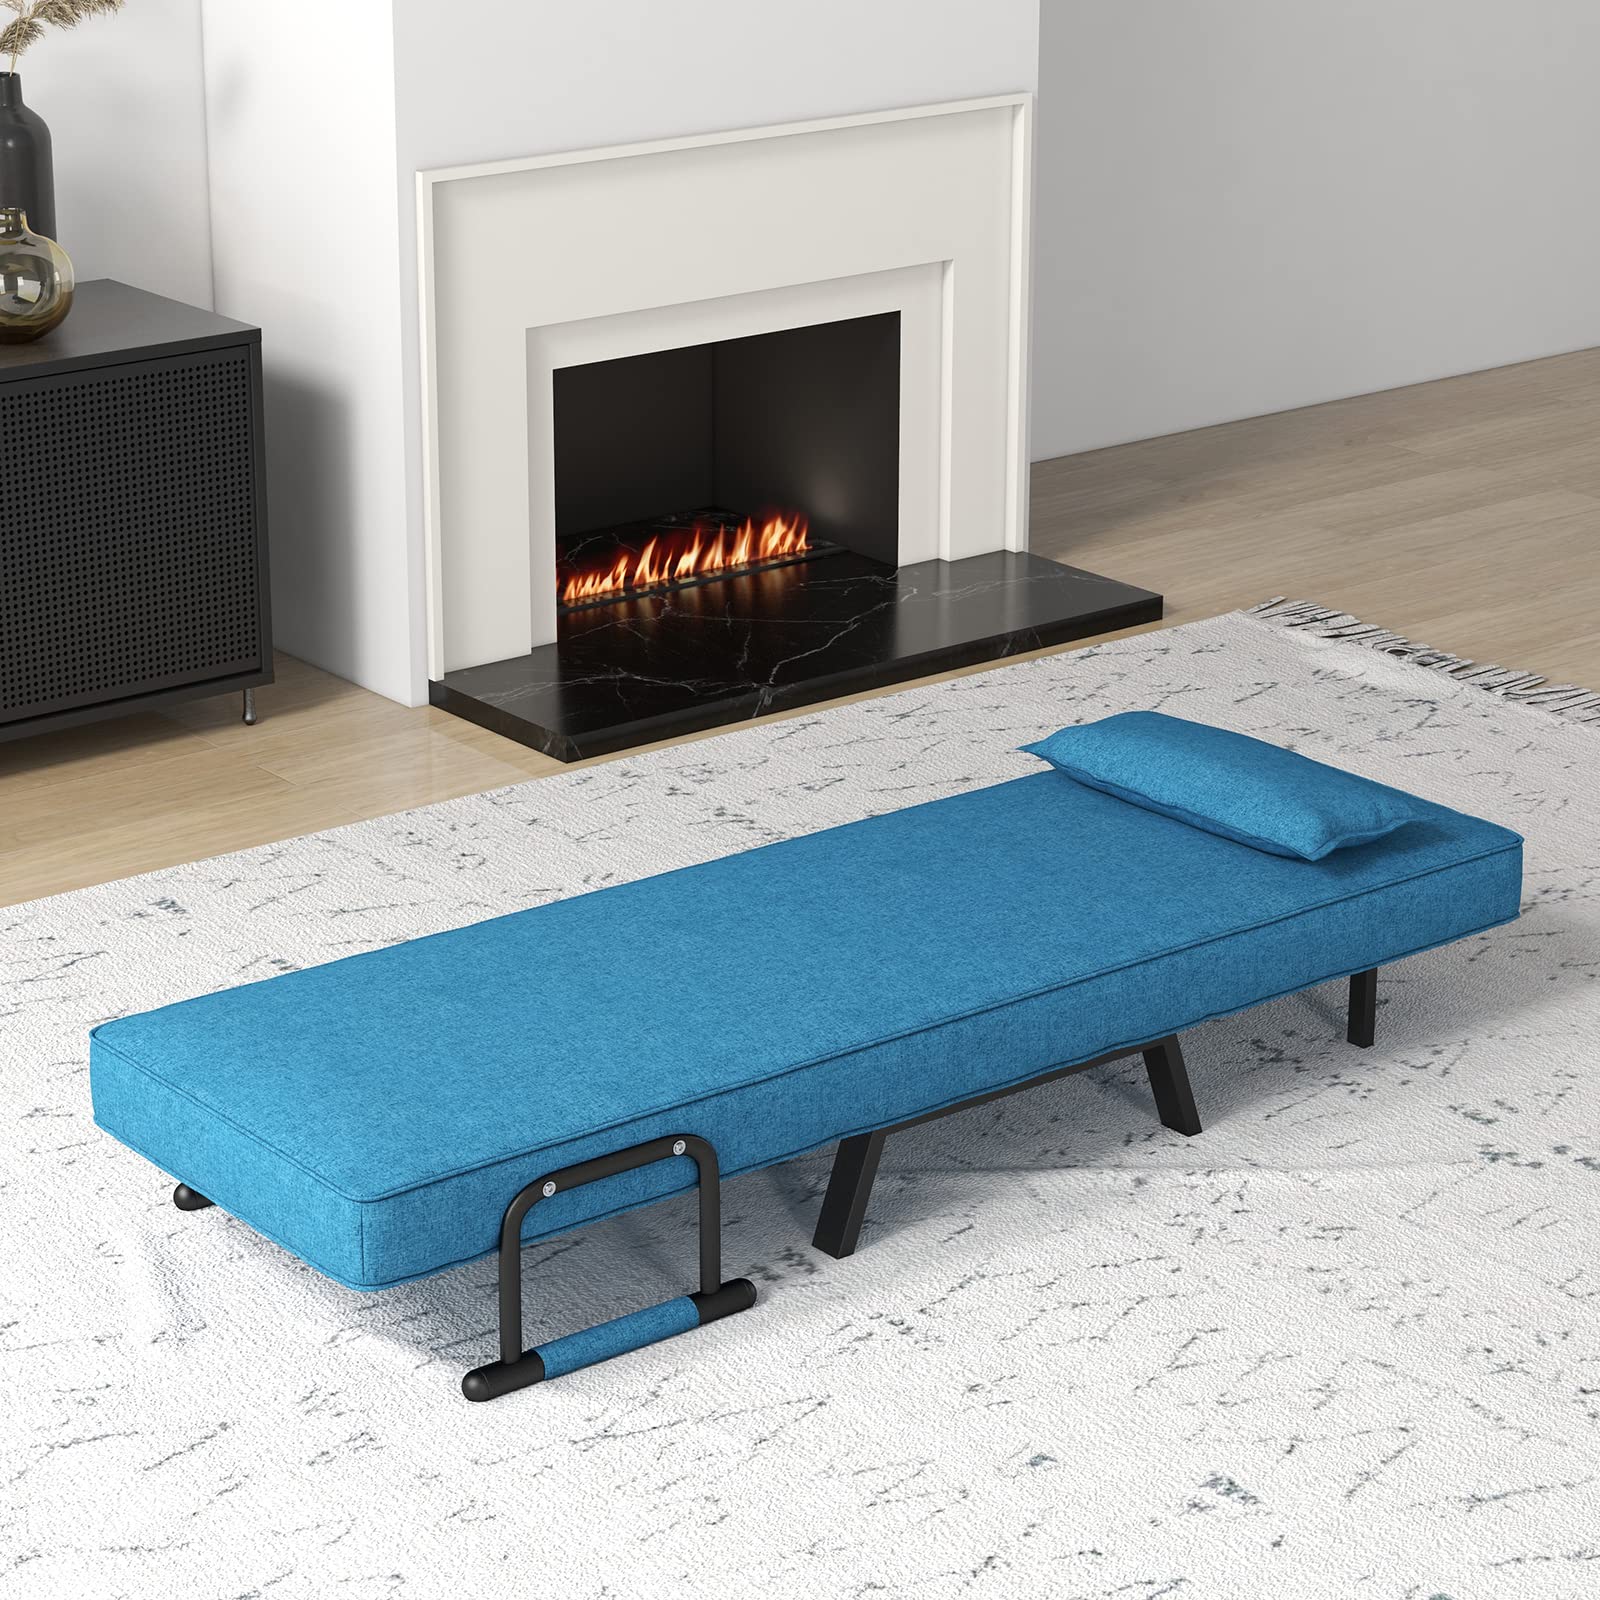 Giantex Convertible Sofa Bed, 4-in-1 Sleeper Chair with Pillow